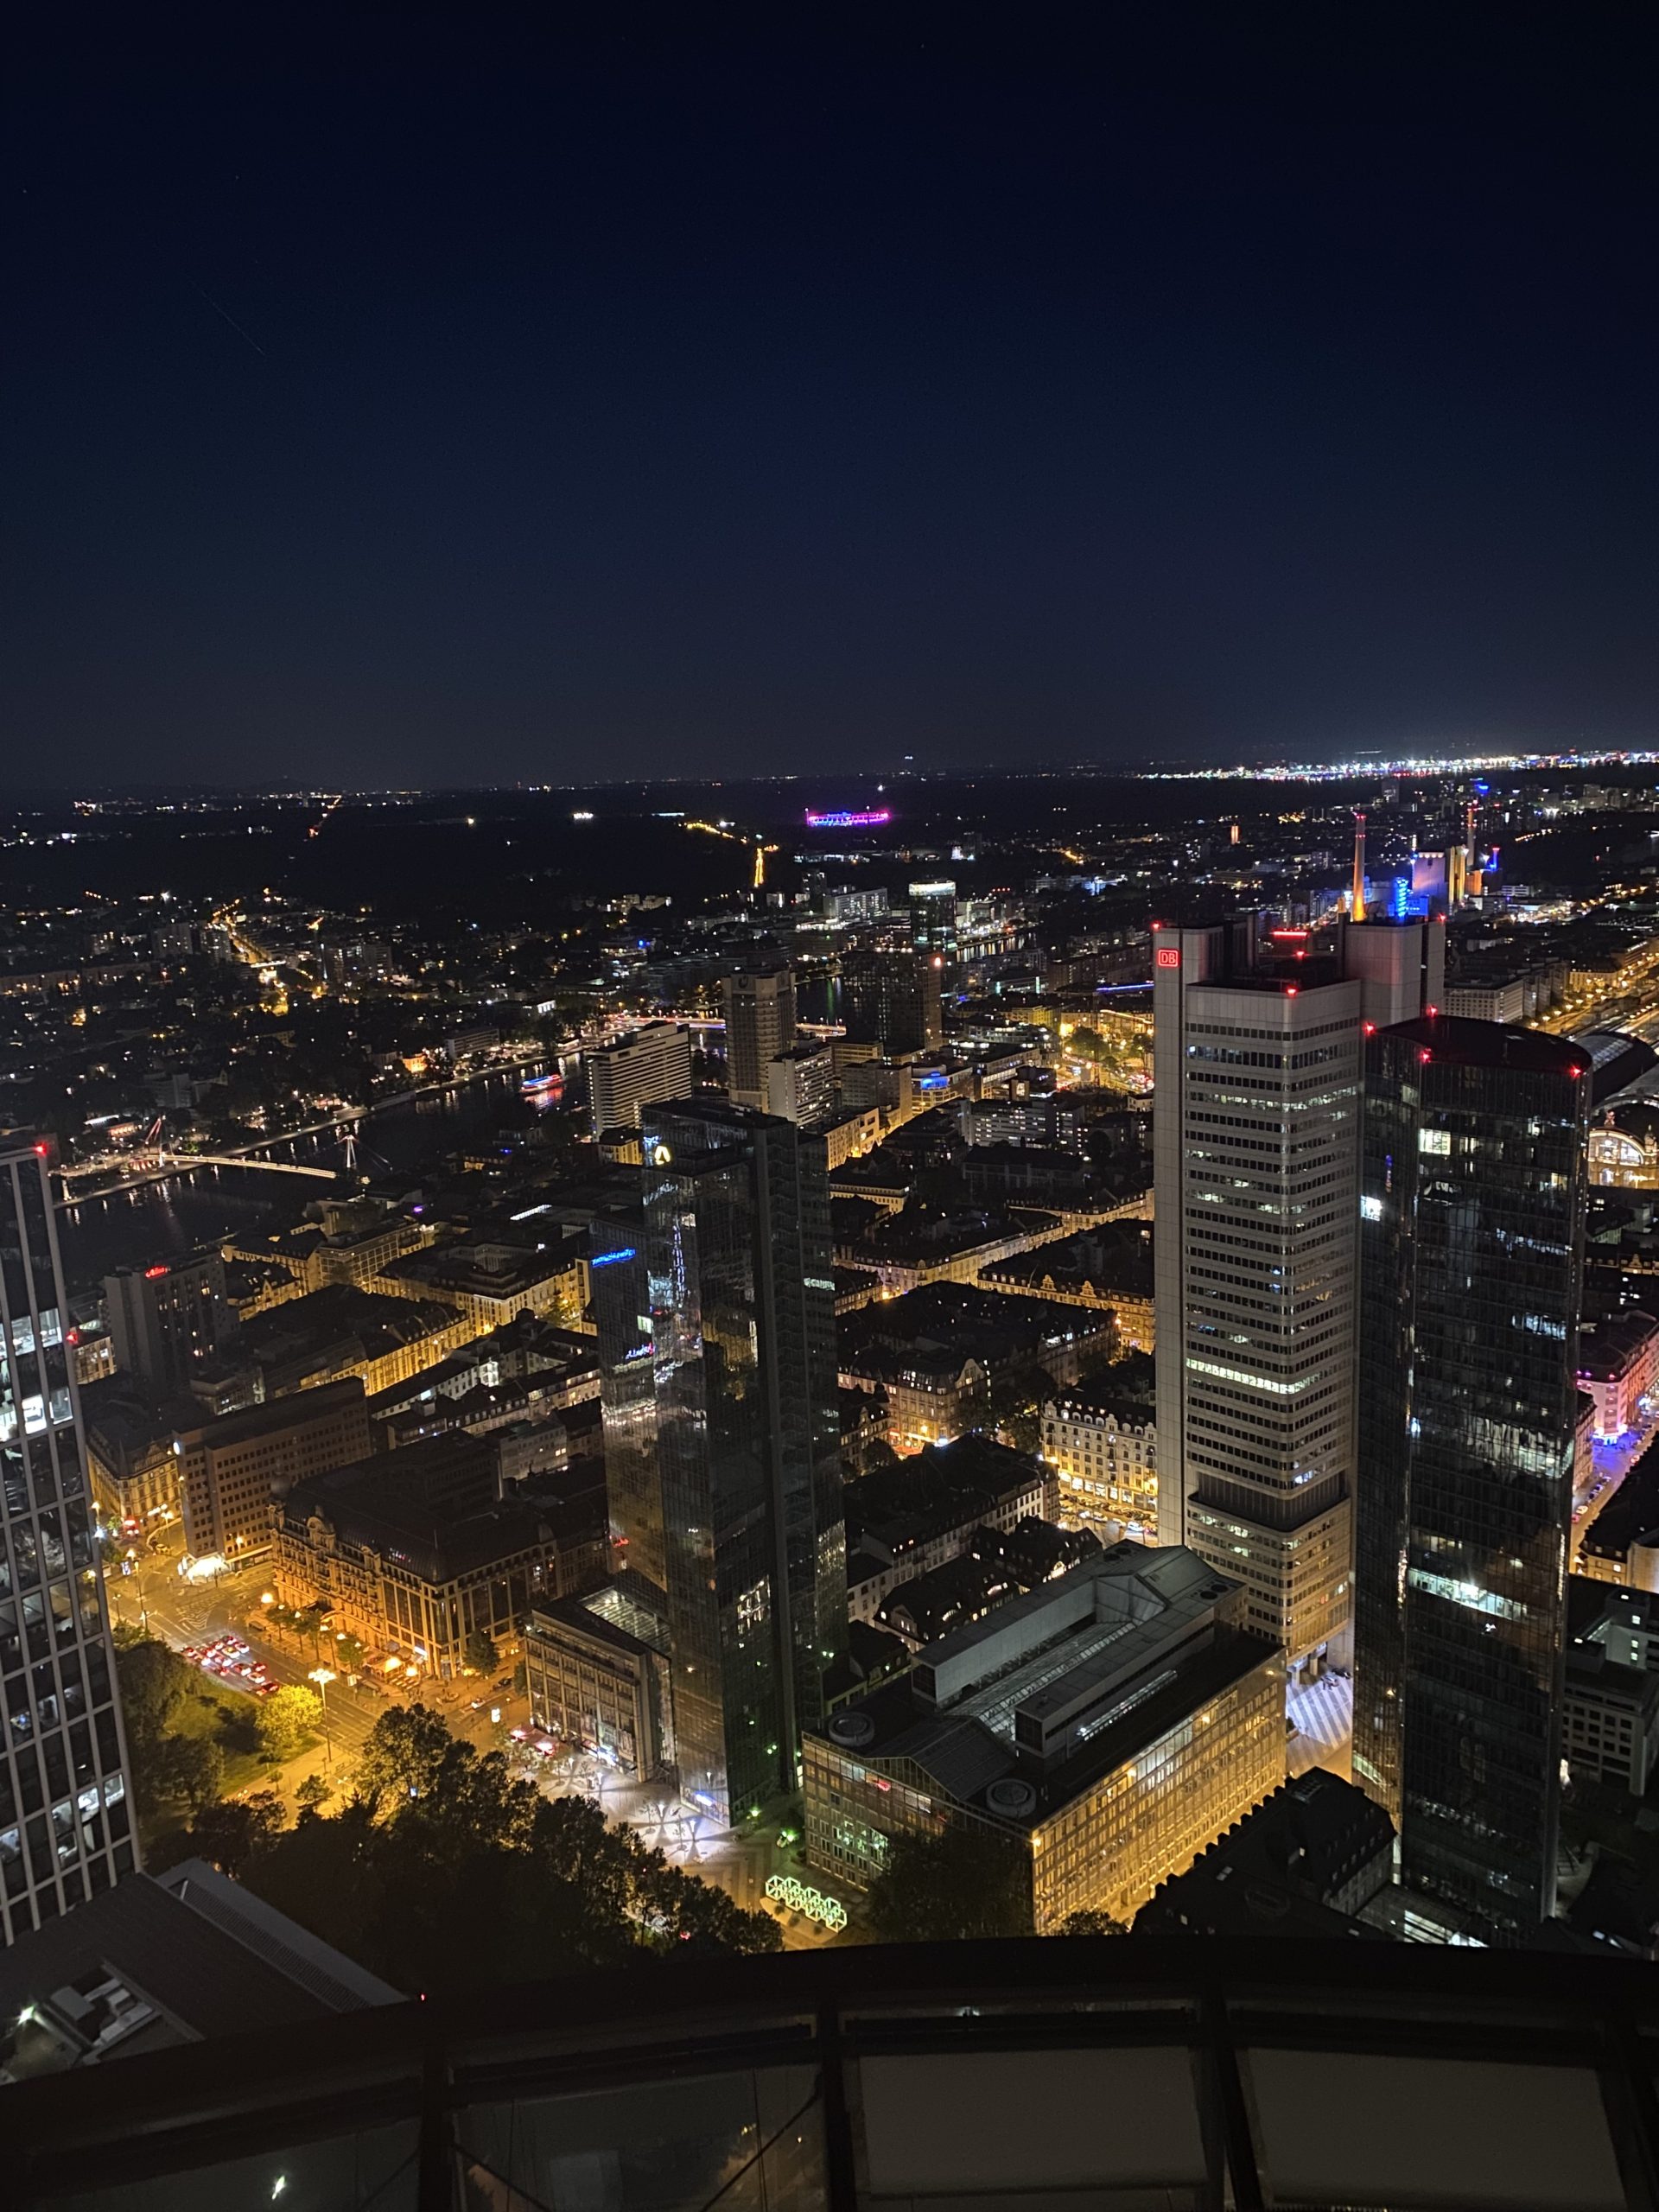 Night view over Frankfurt city from the Maintower